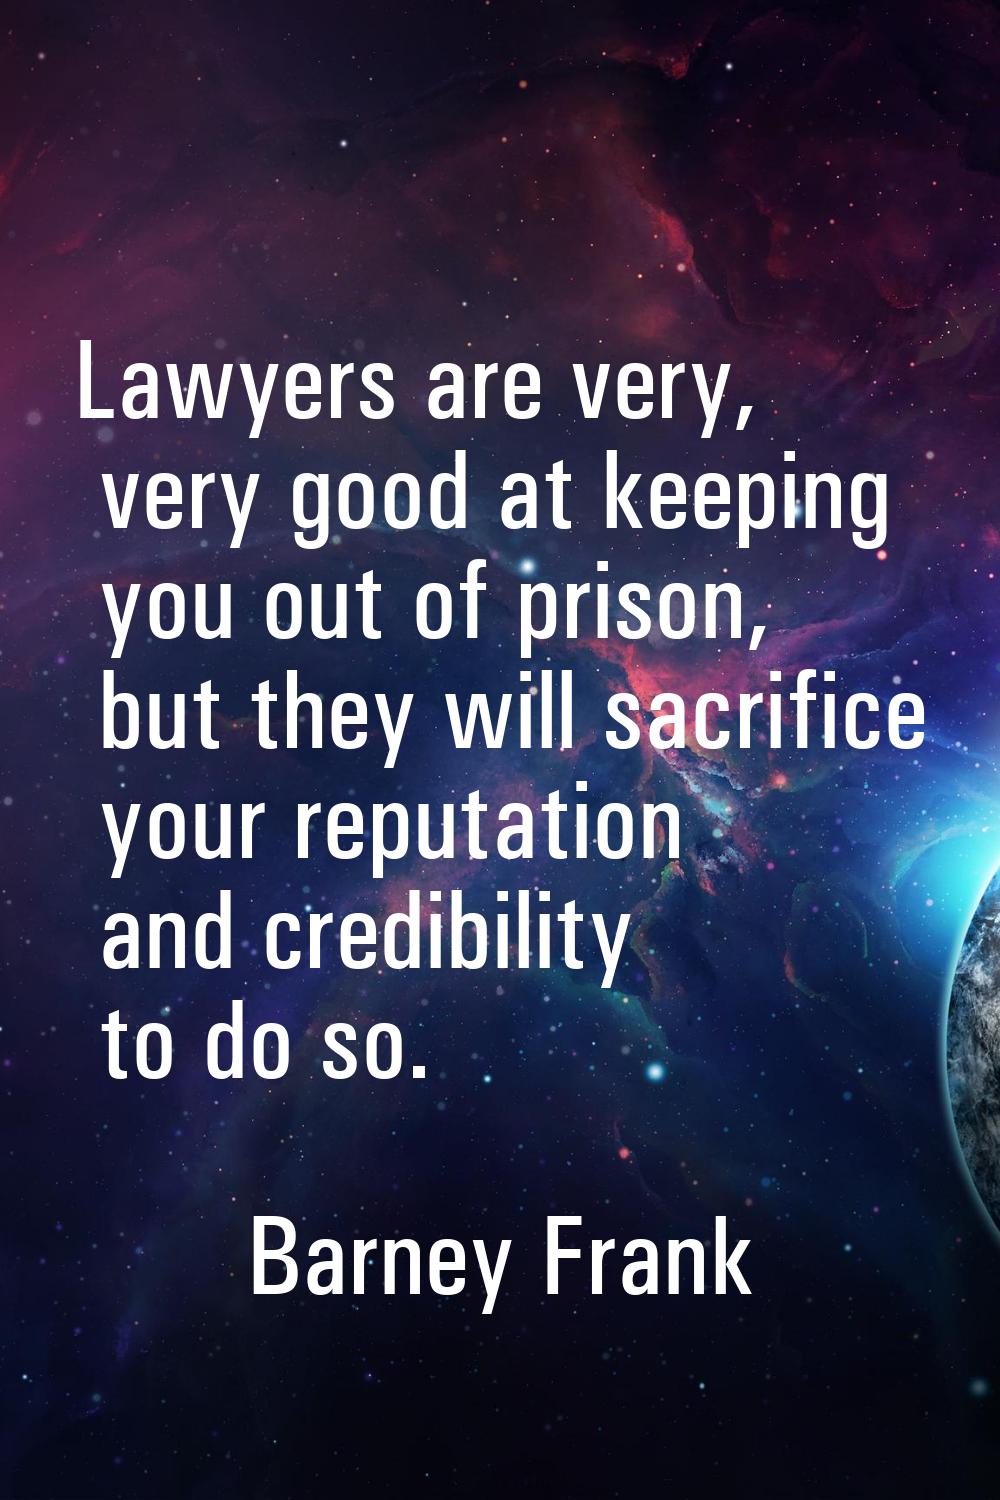 Lawyers are very, very good at keeping you out of prison, but they will sacrifice your reputation a